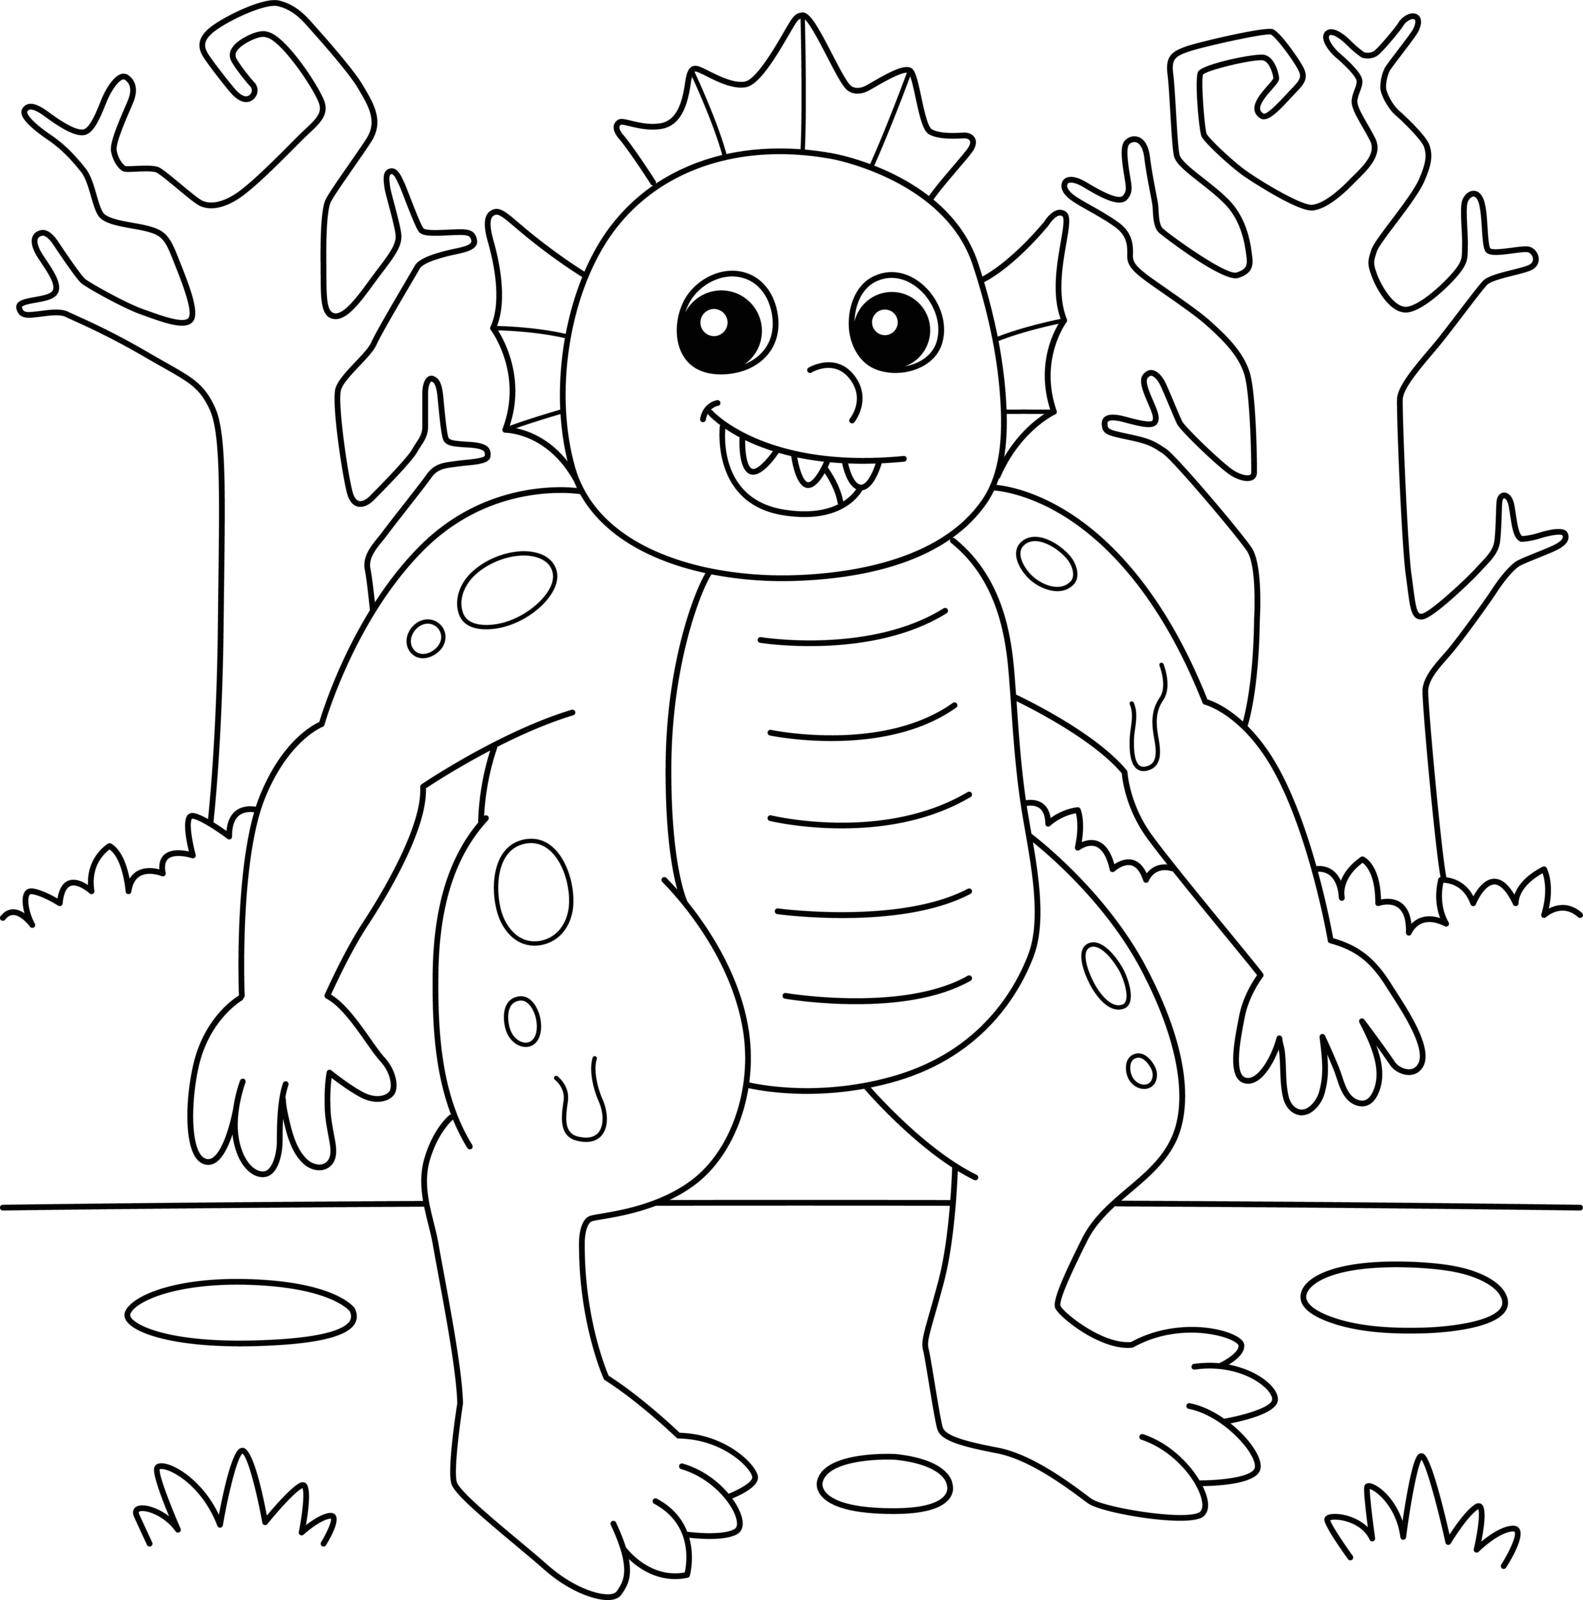 A cute and funny coloring page of a swamp monster halloween. Provides hours of coloring fun for children. To color, this page is very easy. Suitable for little kids and toddlers.